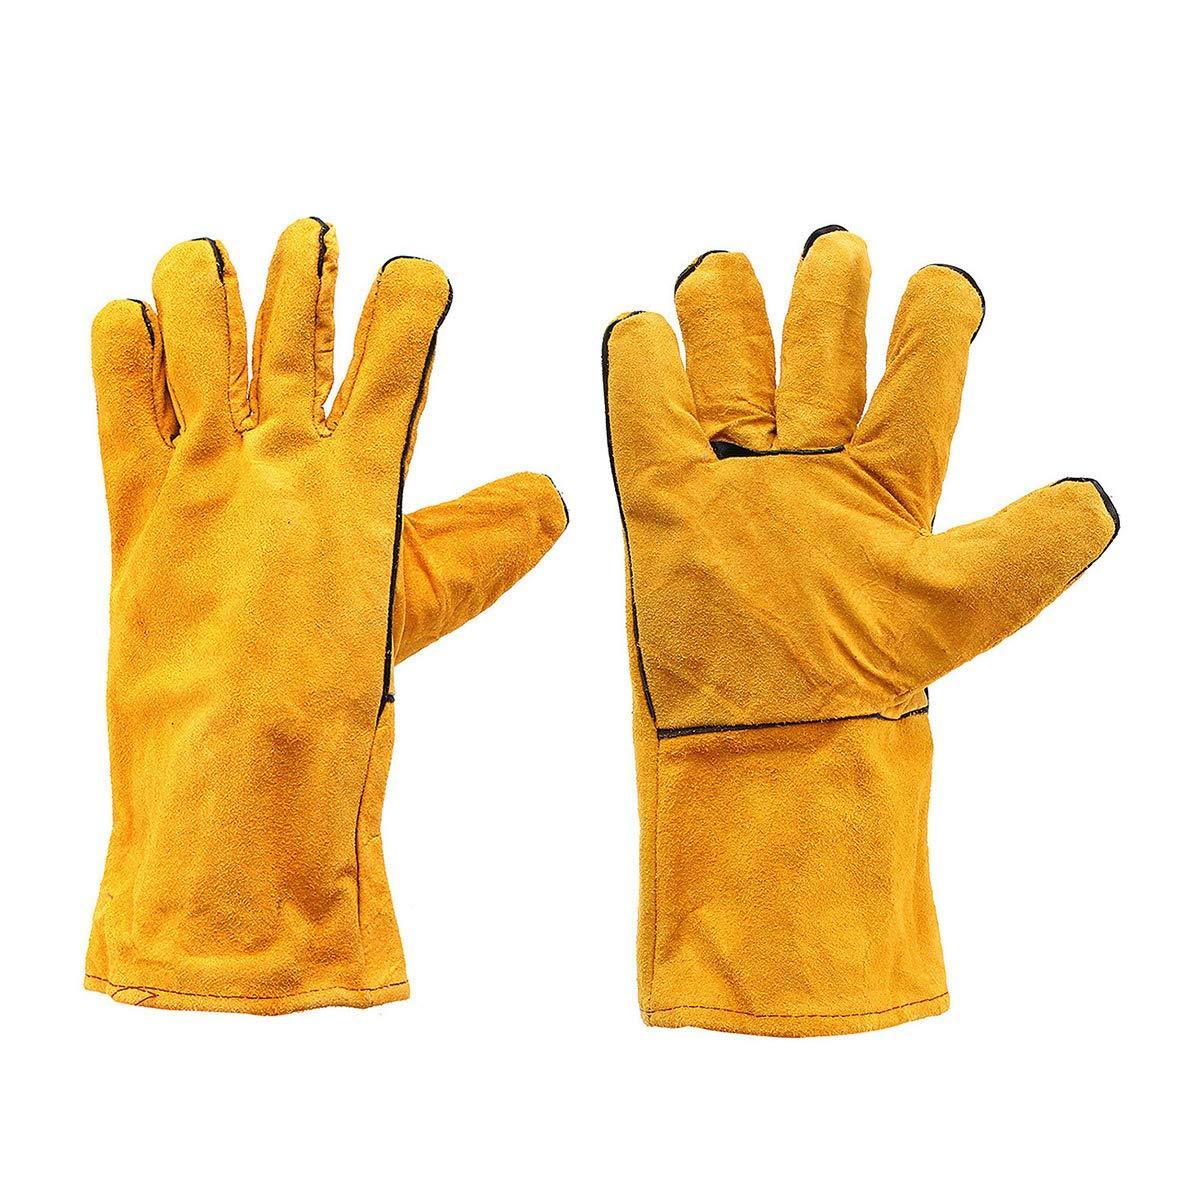 0716 Protective Durable Heat Resistant Welding Gloves - SkyShopy